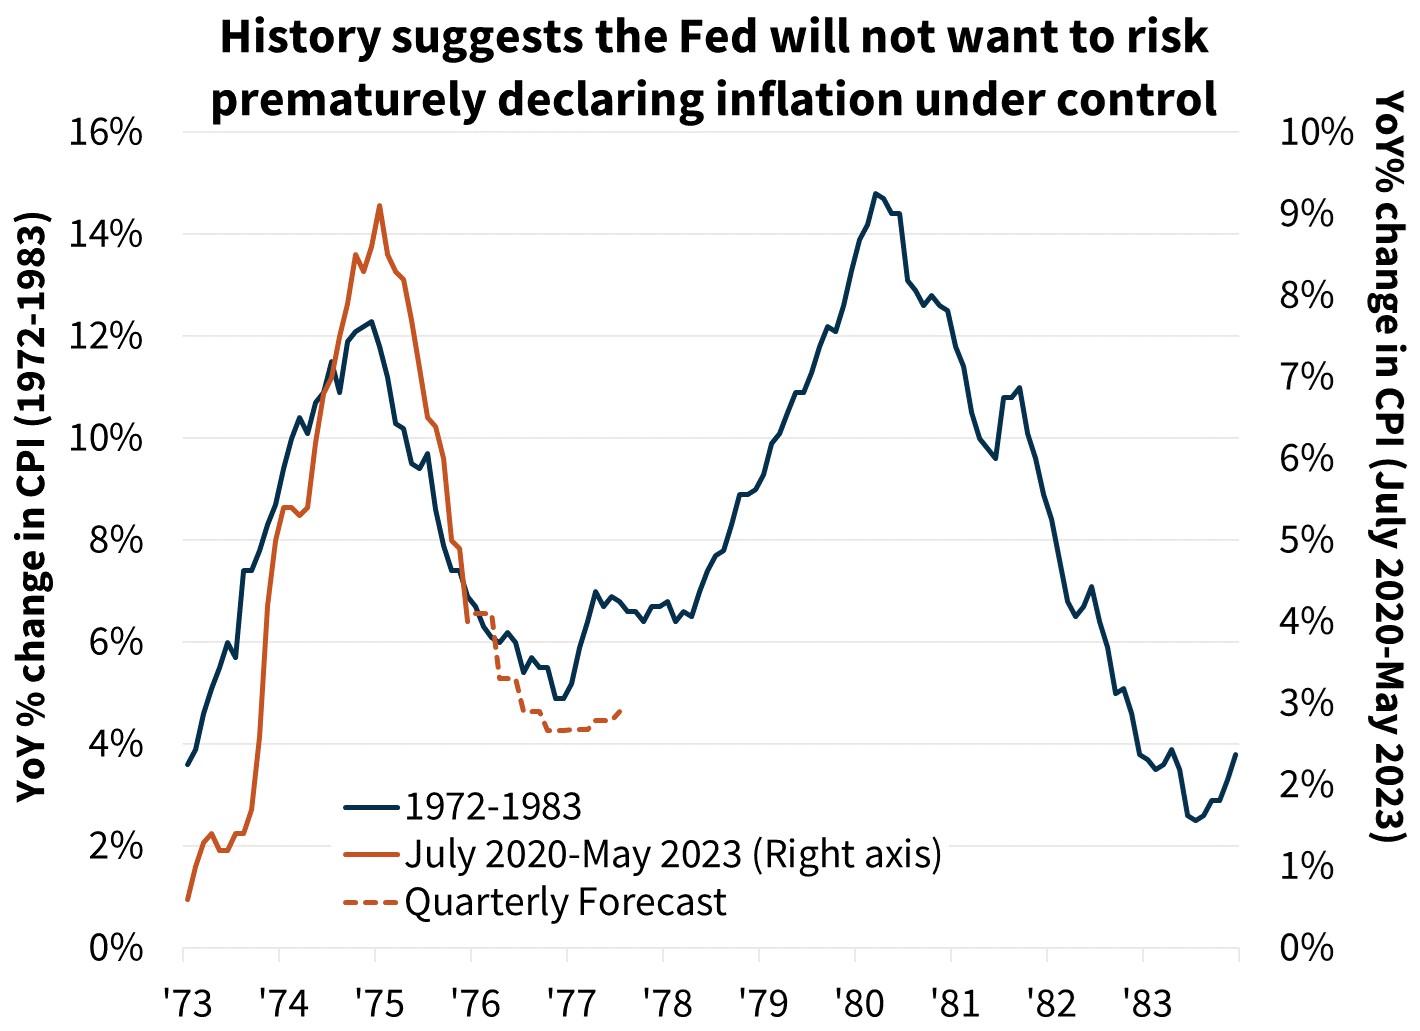 History suggests the Fed will not want to risk prematurely declaring inflation under control 